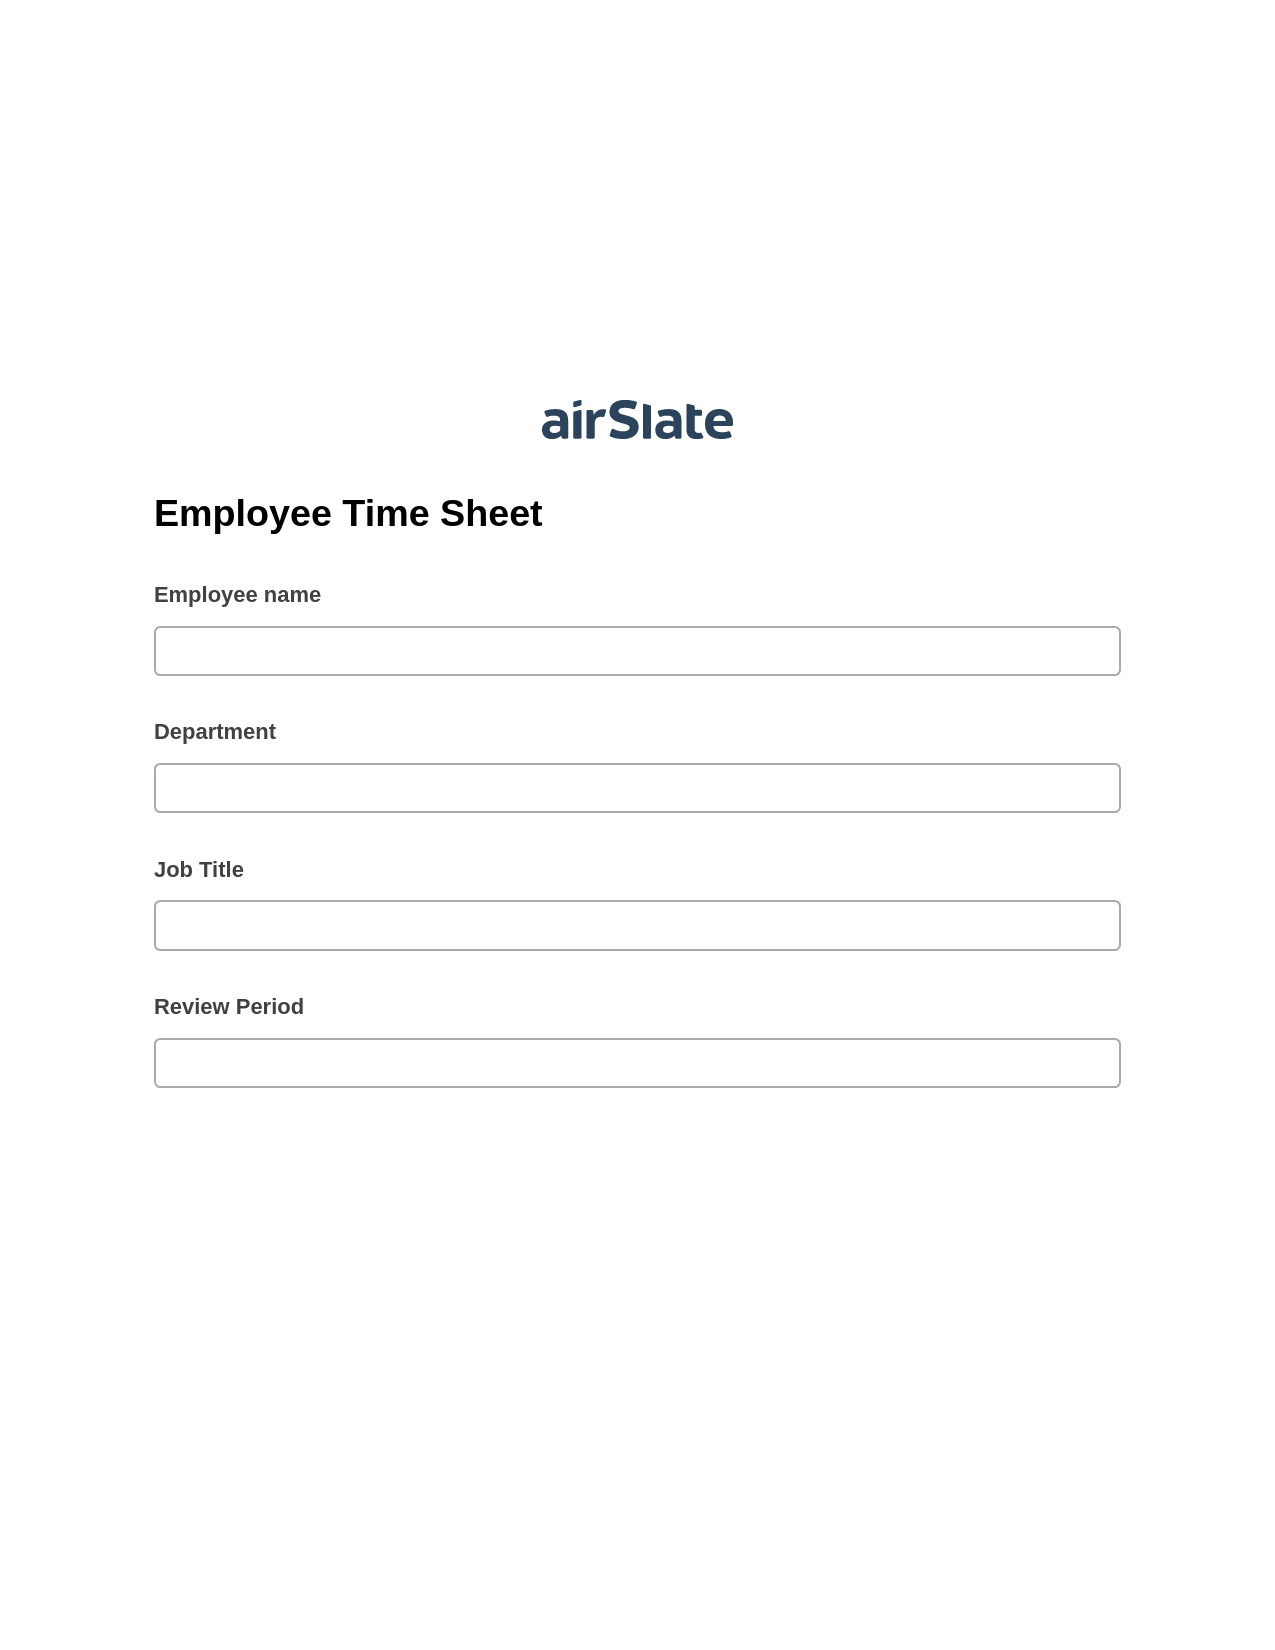 Multirole Employee Time Sheet Pre-fill Dropdowns from Office 365 Excel Bot, Update NetSuite Record Bot, Archive to Dropbox Bot